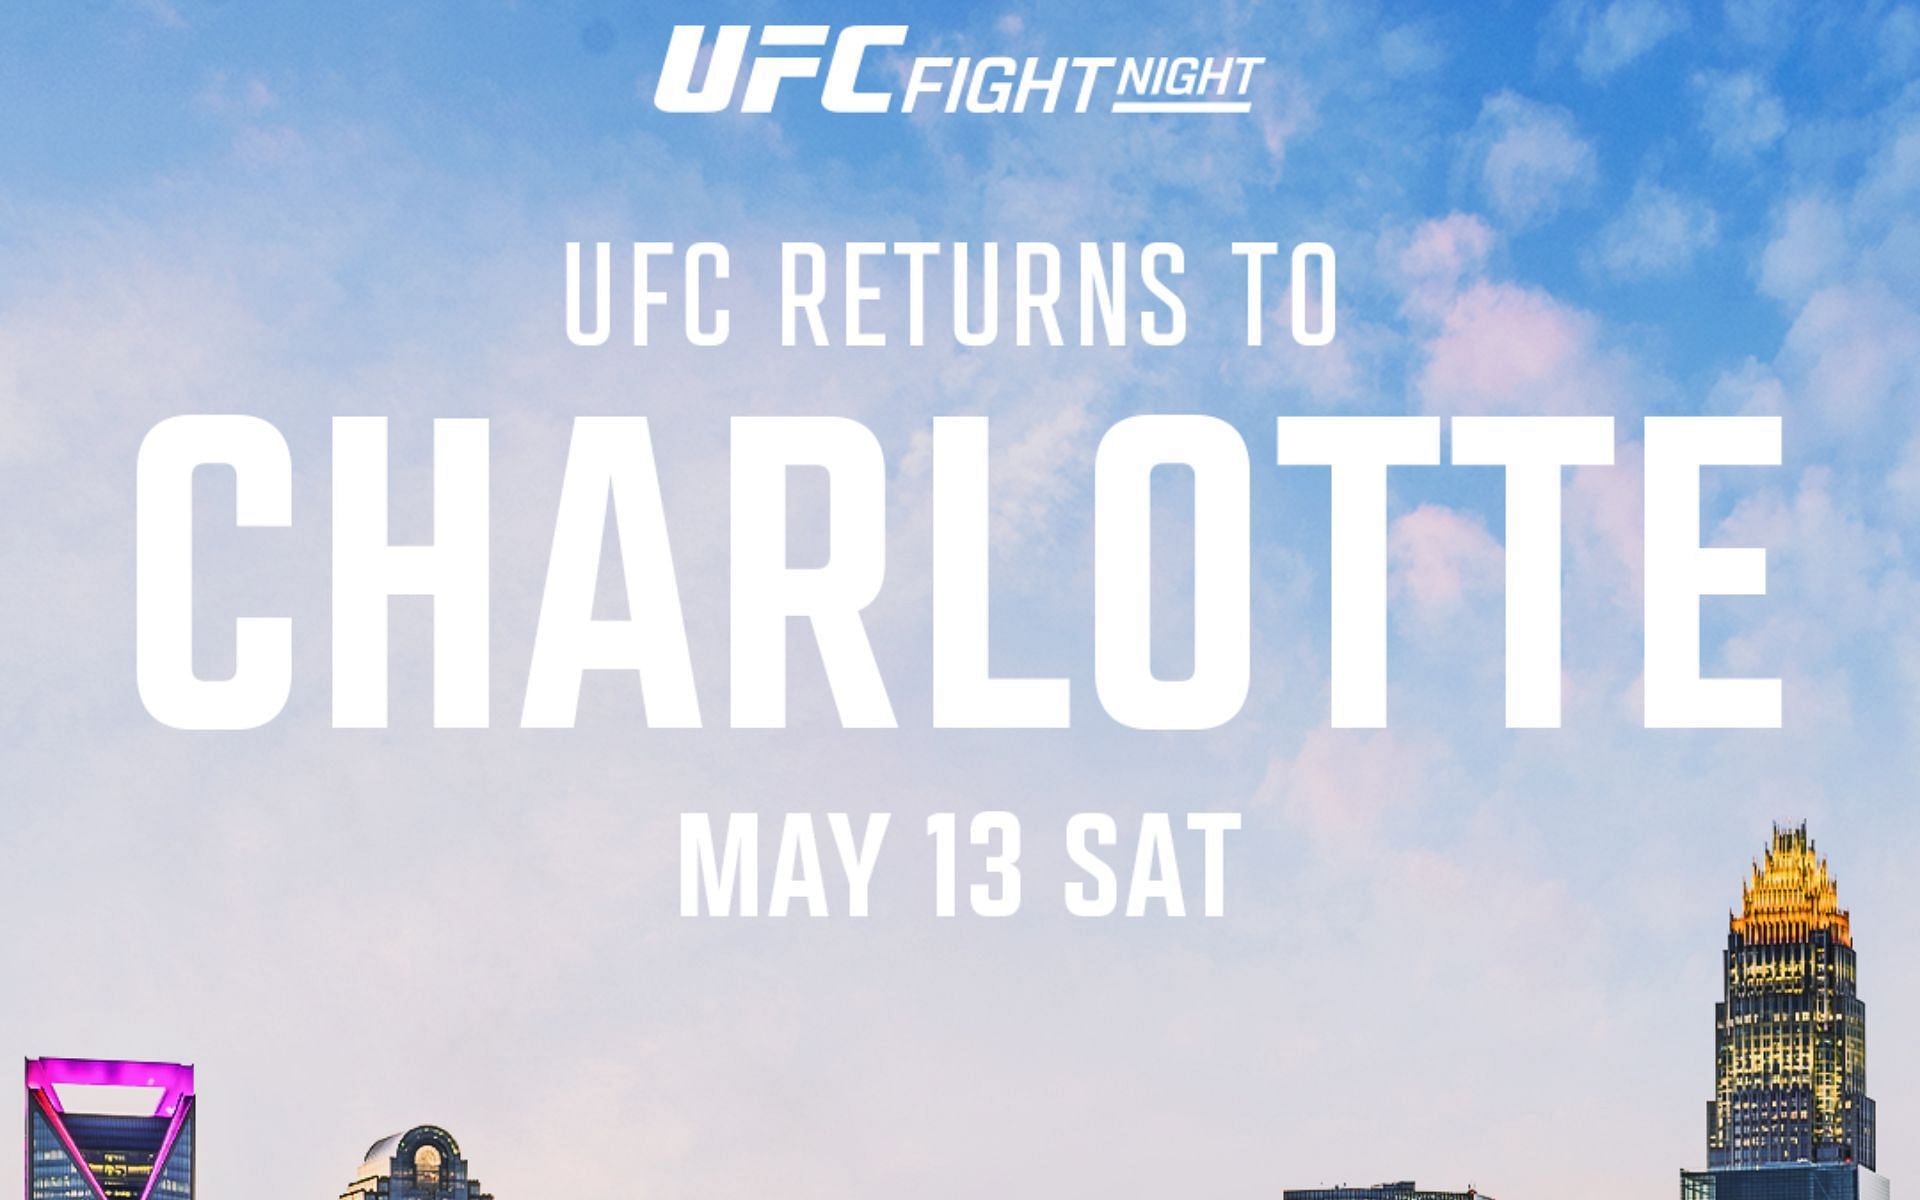 UFC announces return to Charlotte for event in May